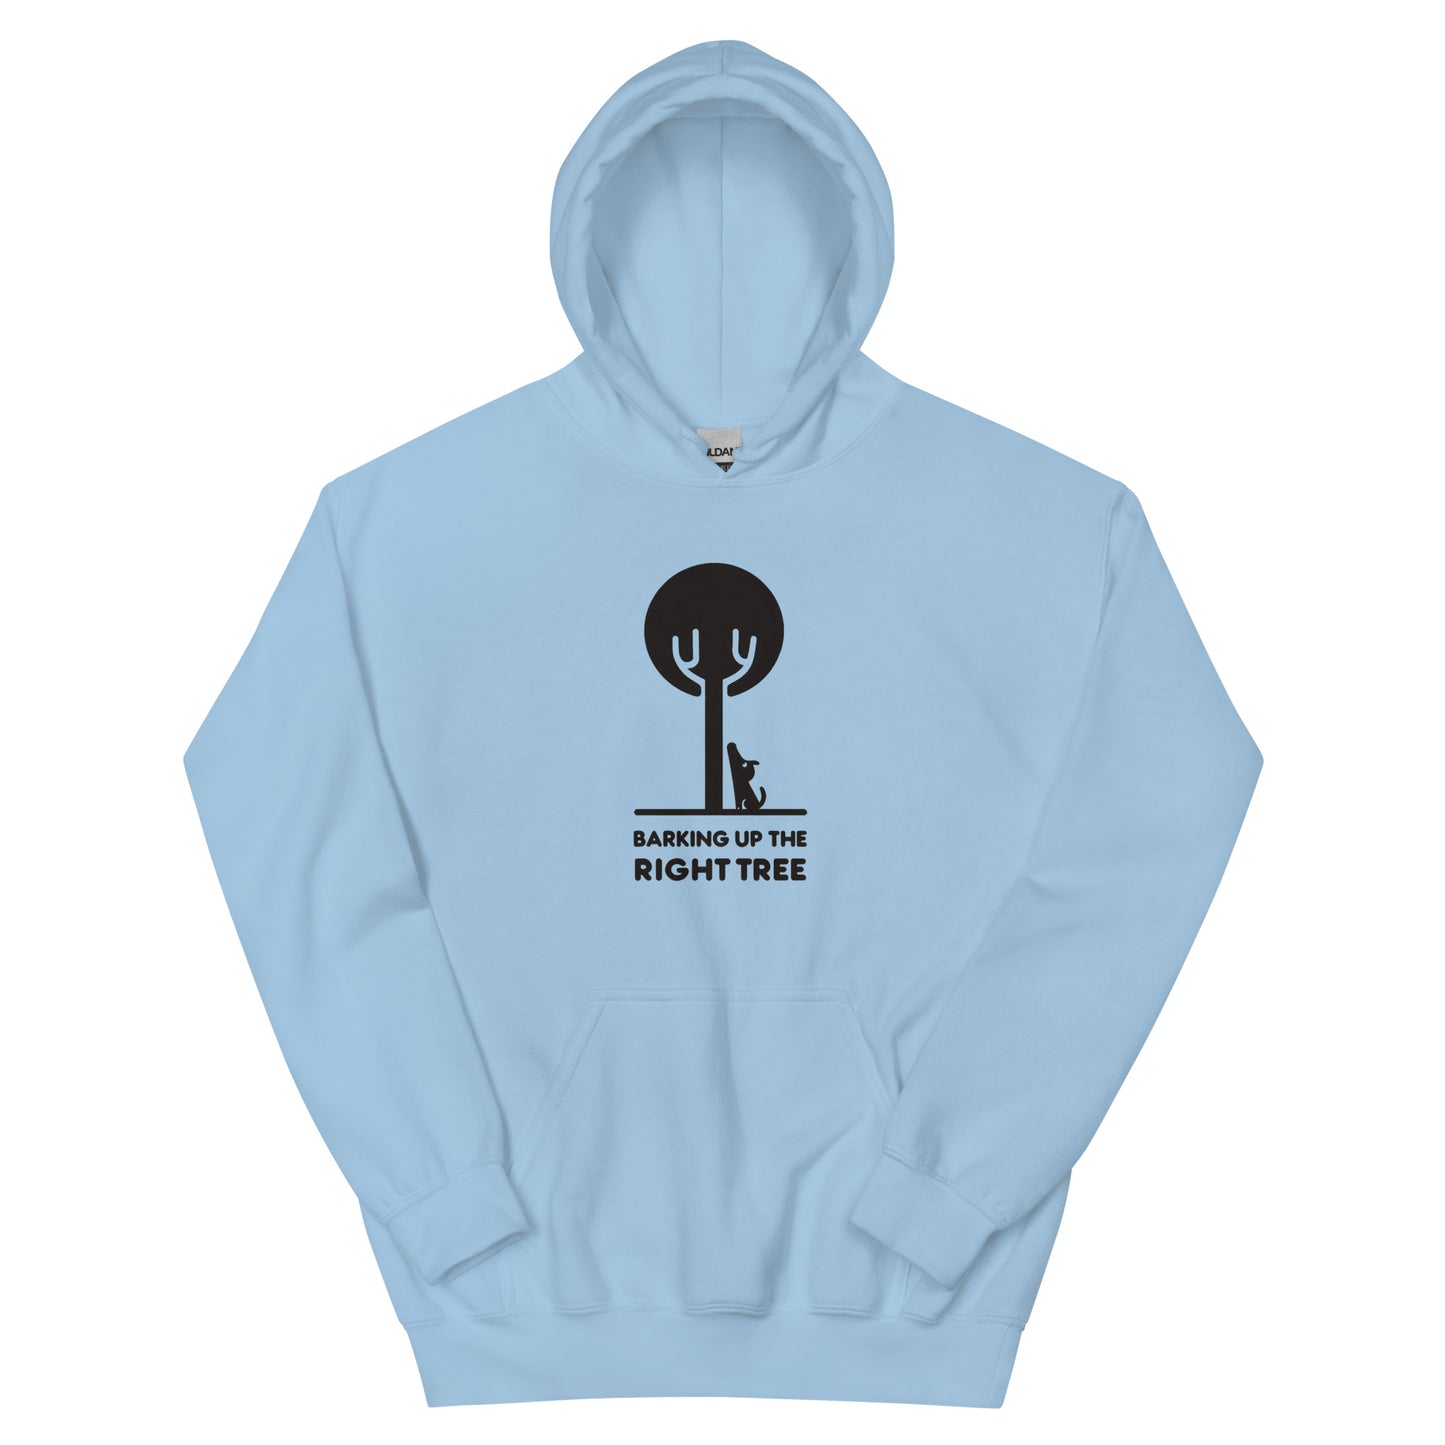 BARKING AT THE RIGHT TREE - Unisex Hoodie